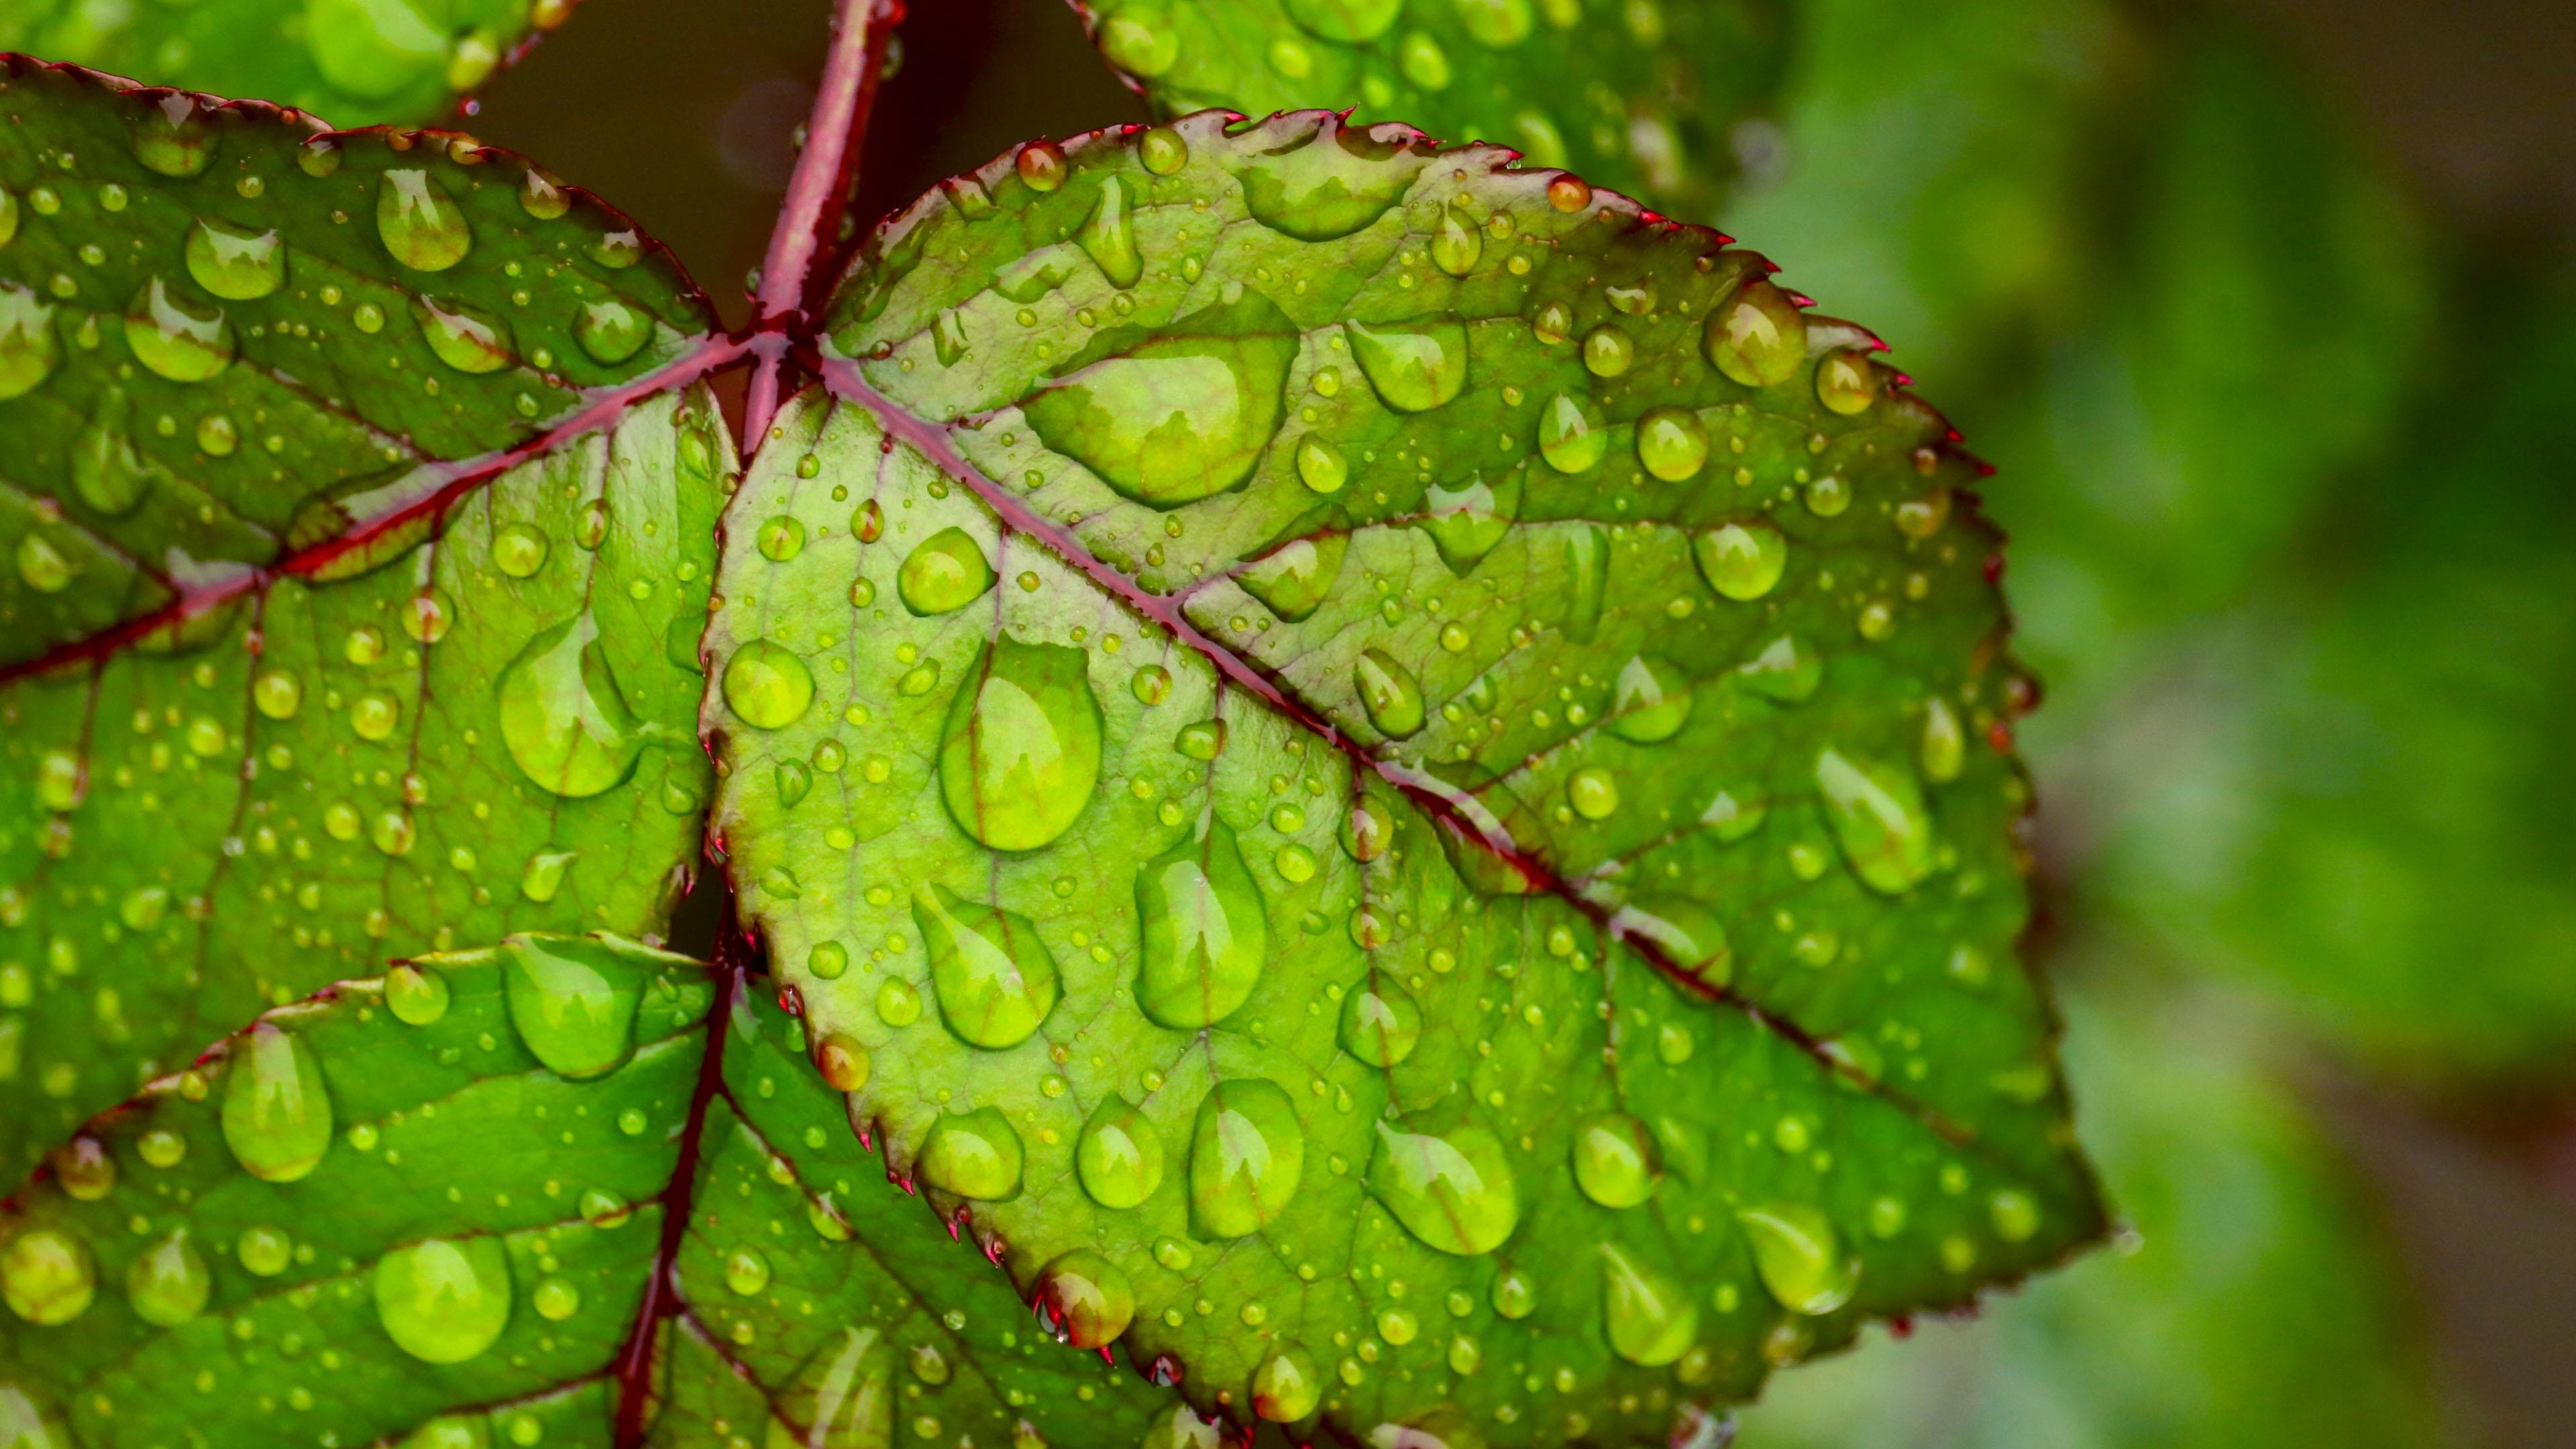 Water droplets on green leaf 4K Ultra HD Wallpaper for Mobile